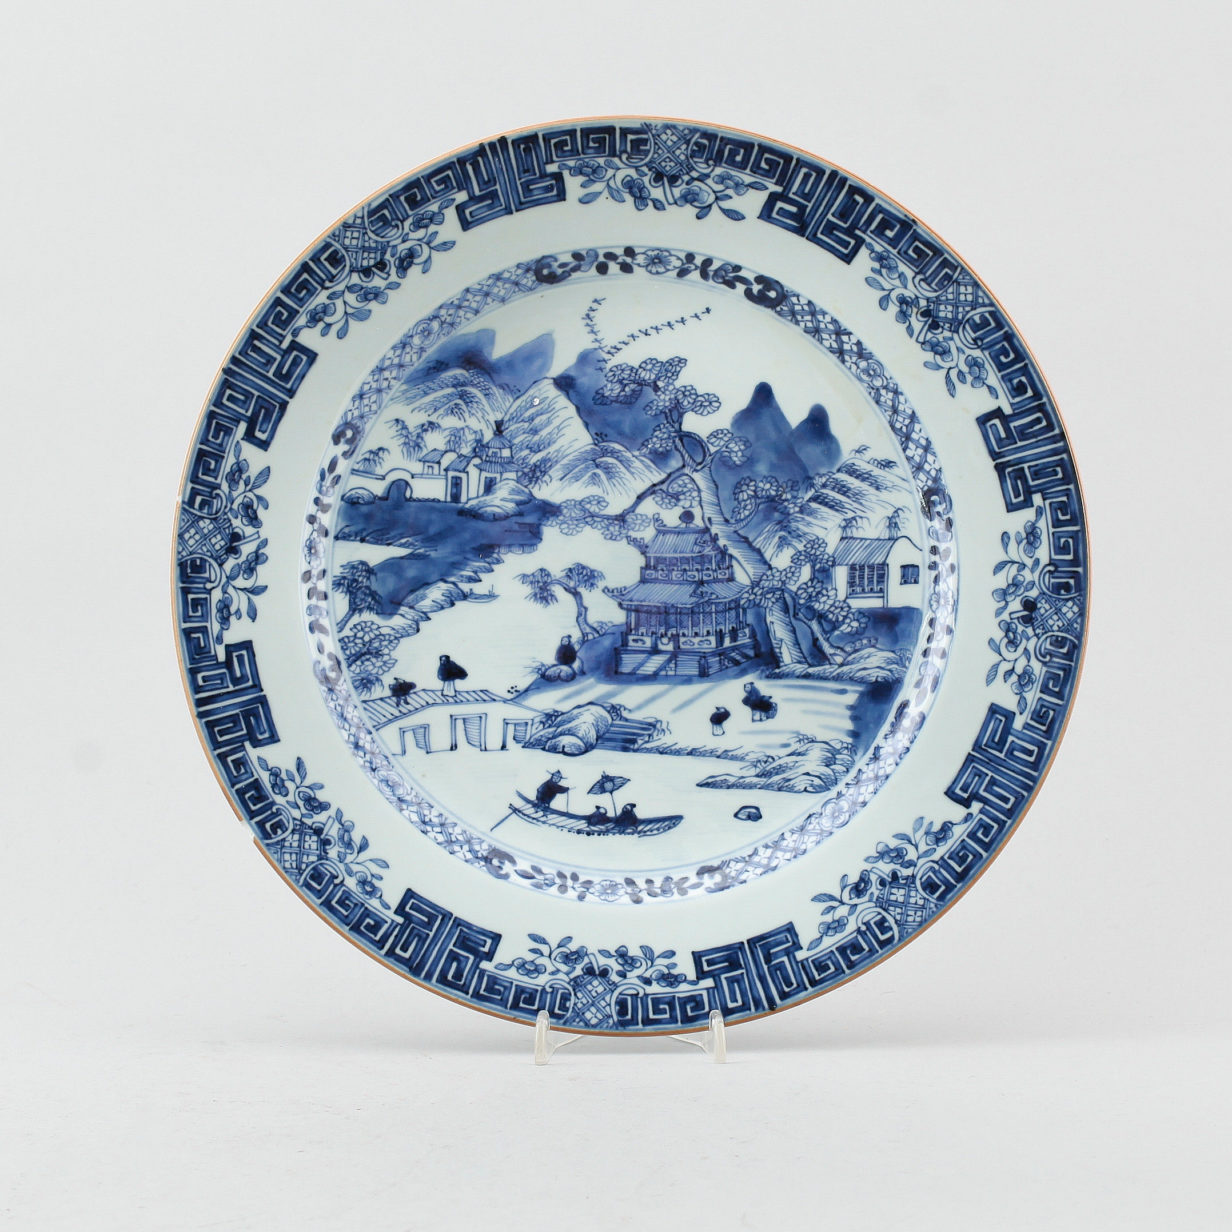 A qianlong period blue and white porcelain plate